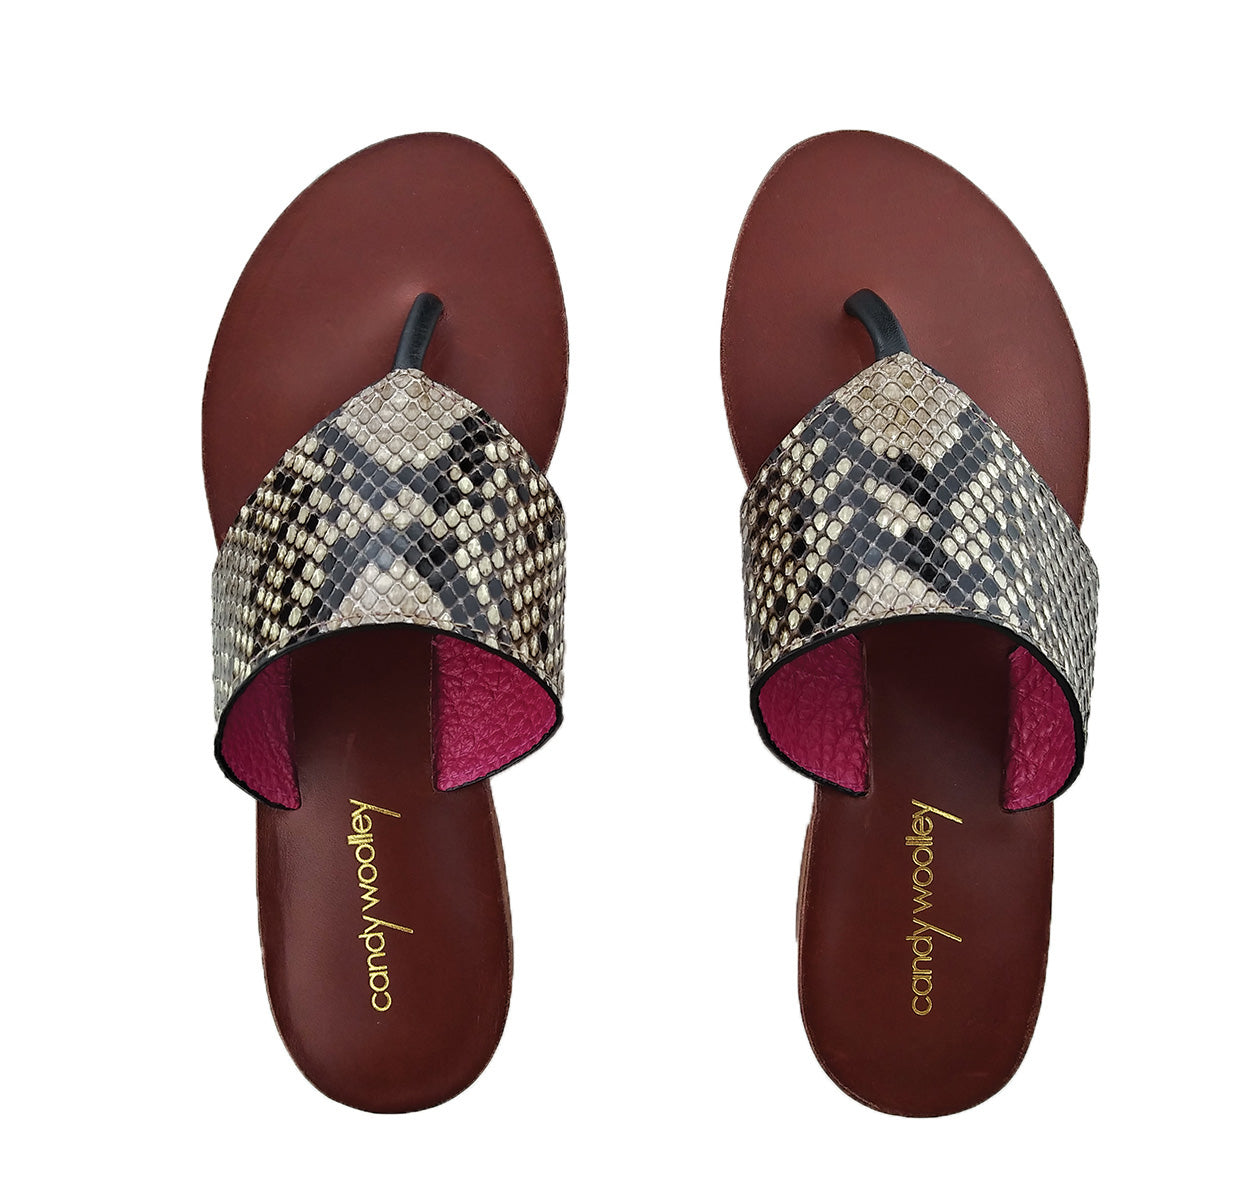 Genuine Python Flat Thong Sandals. Sizes Available 6-10. [NEW: NON-SLIP & SOLE PROTECTOR]